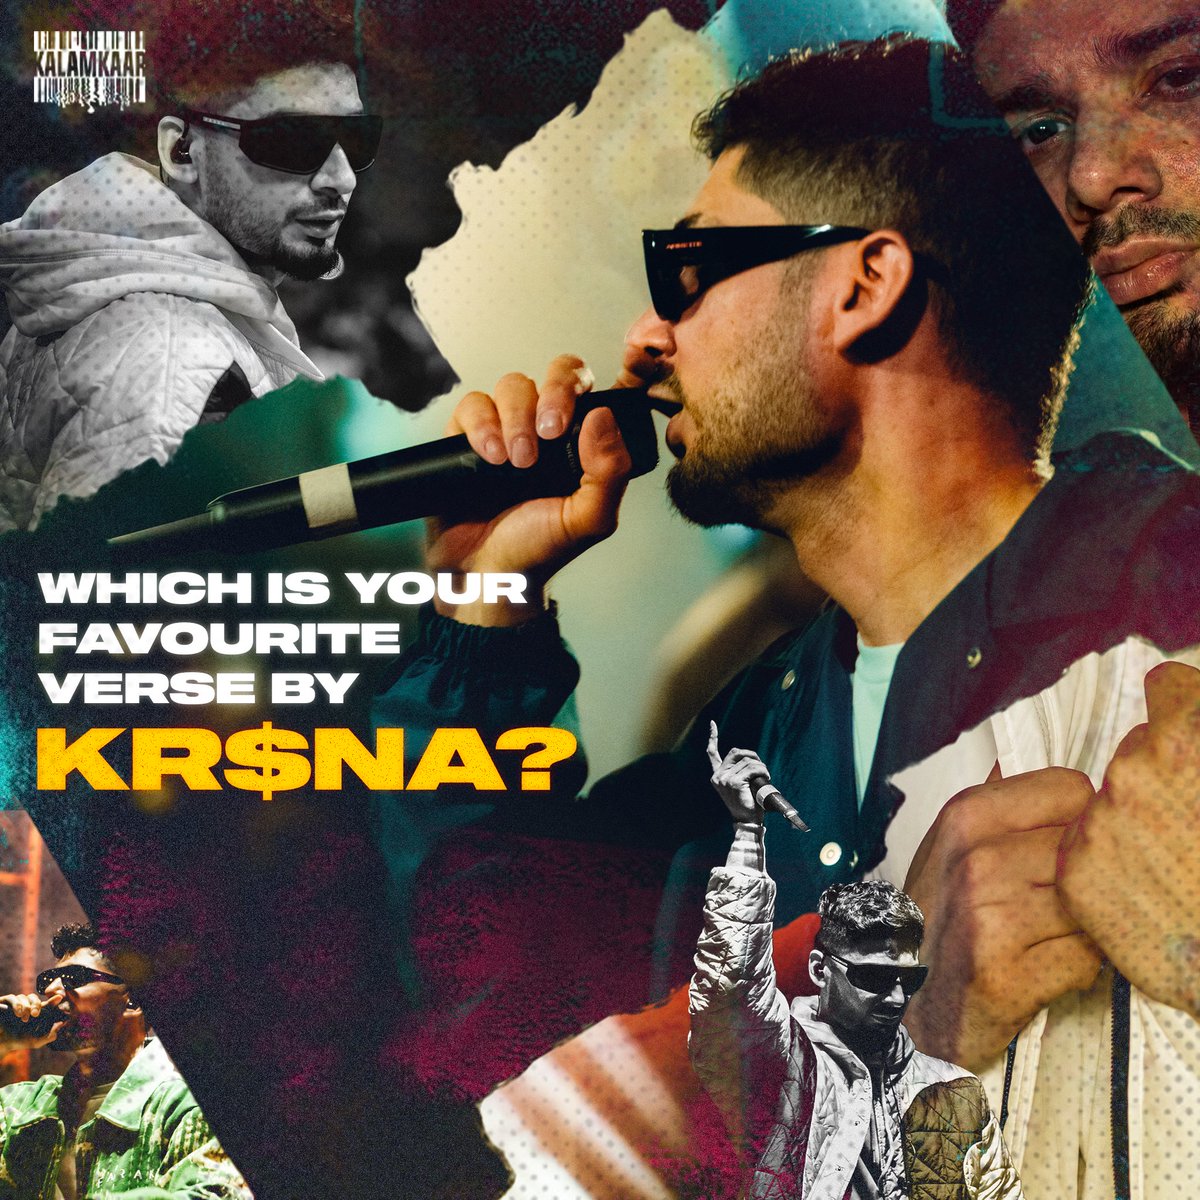 You’ve heard the hardest ones through the years ⚔️ Time to cement your favourite ones in the comments @realkrsna #hiphop #dollarsign #awaamtilltheend #awaam #onetime #desihiphop #desirap #kalamkaarmusic #kalamkaar